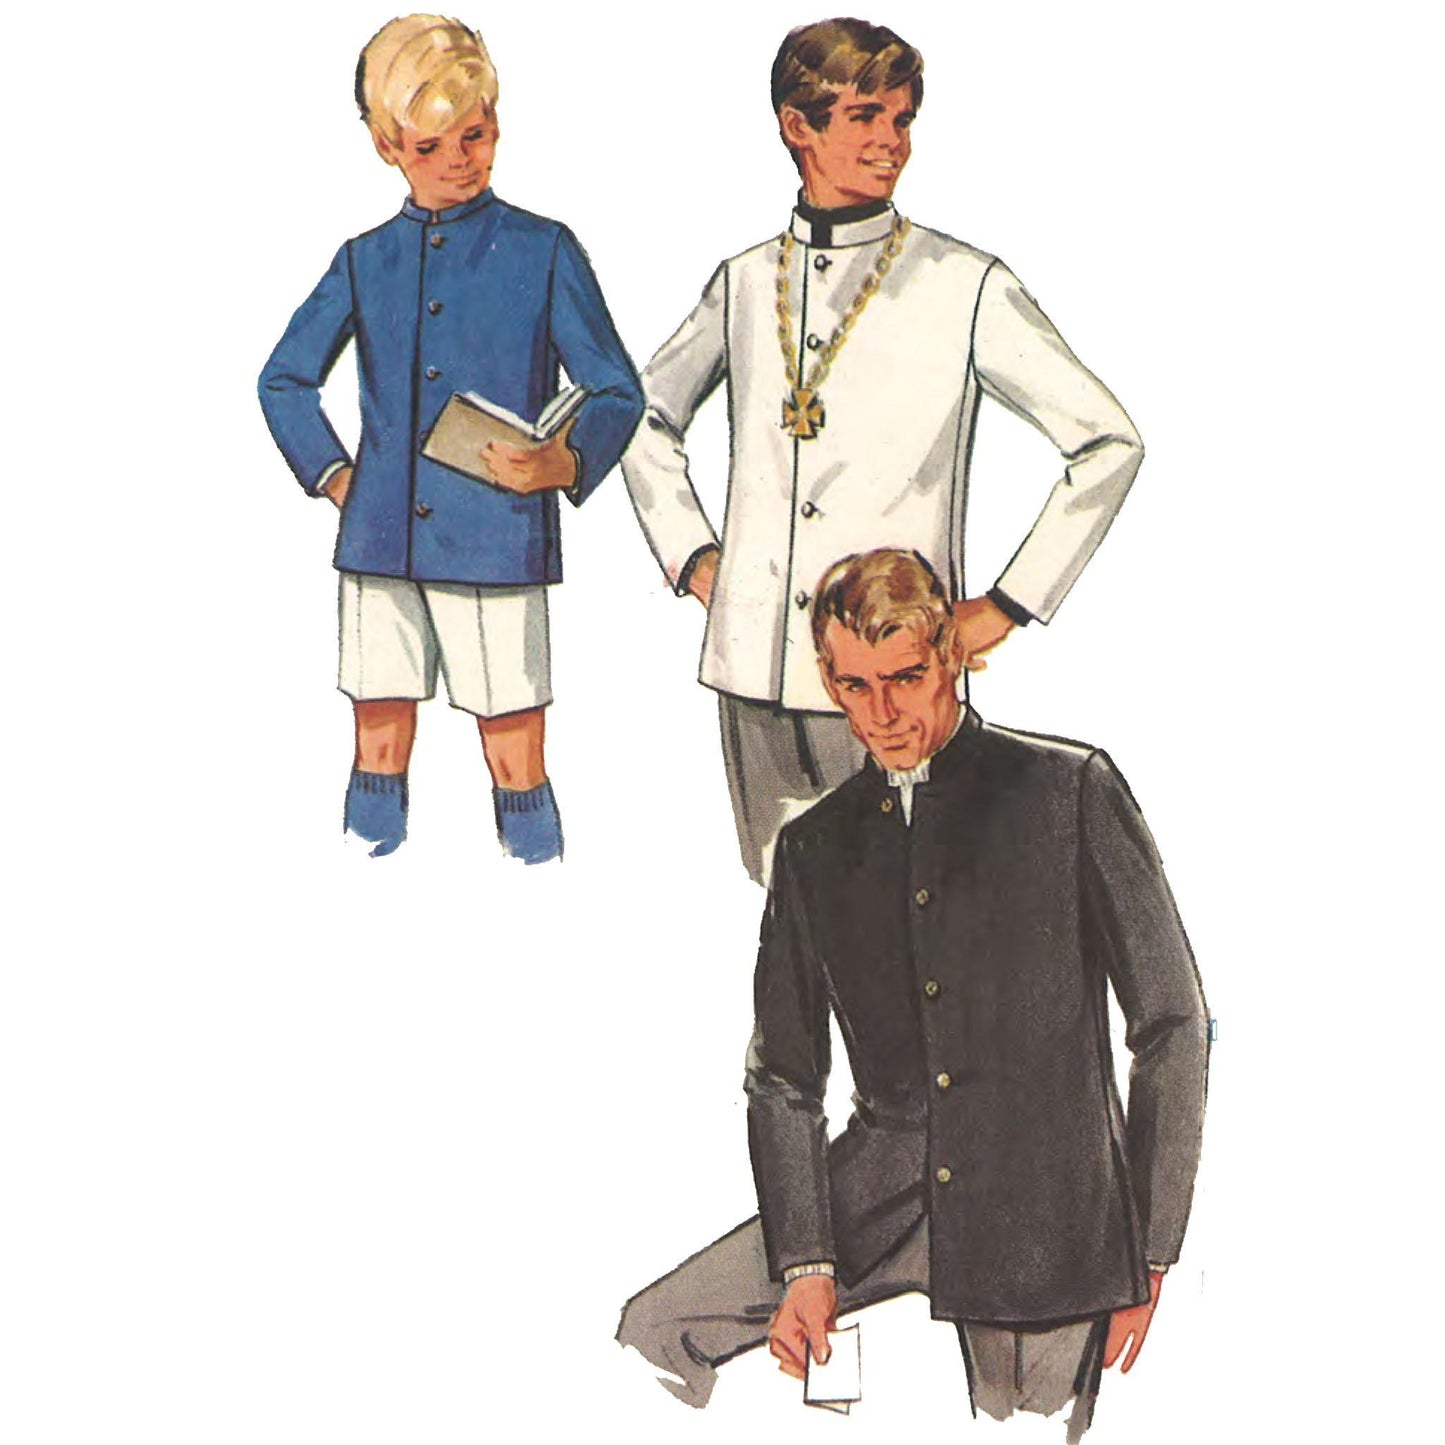 2 men and a boy wearing jackets.